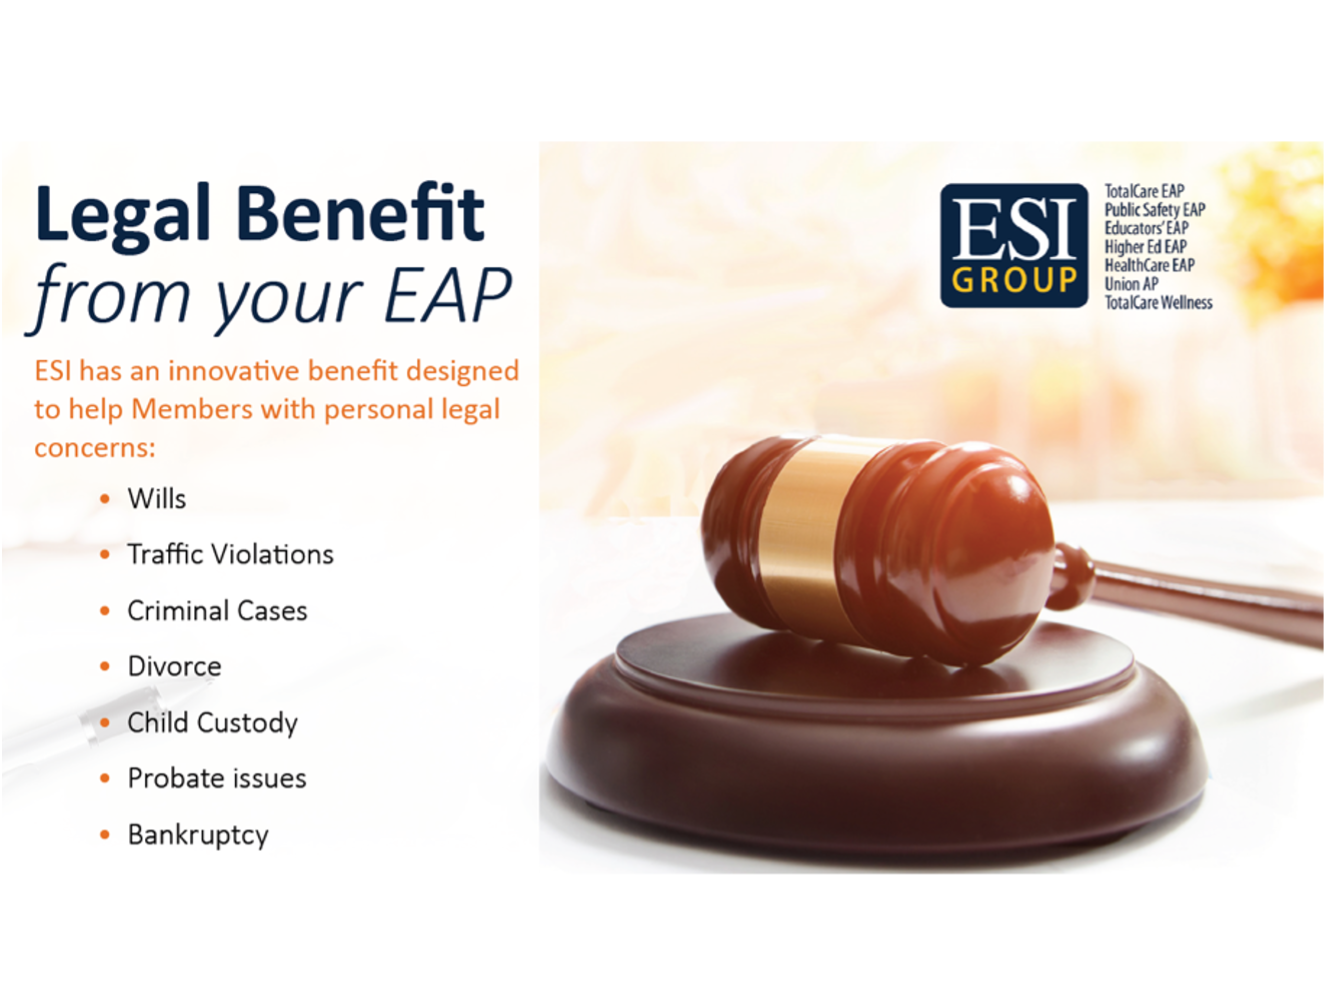 Did you know your EAP inlcudes Legal Benefits?